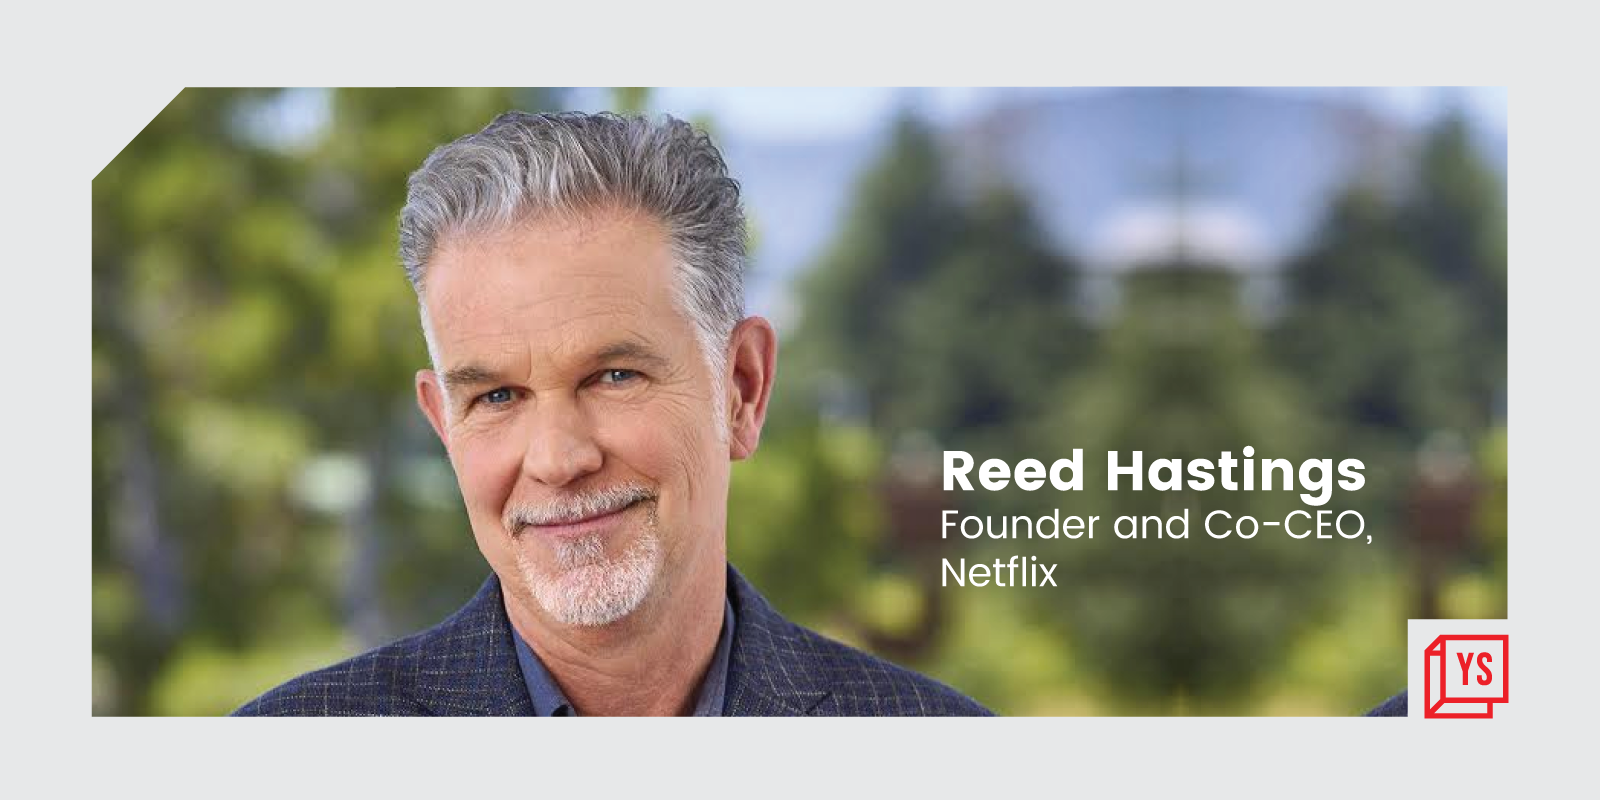 The thing that frustrates us is why haven’t we been successful in India, says Netflix’s Reed Hastings